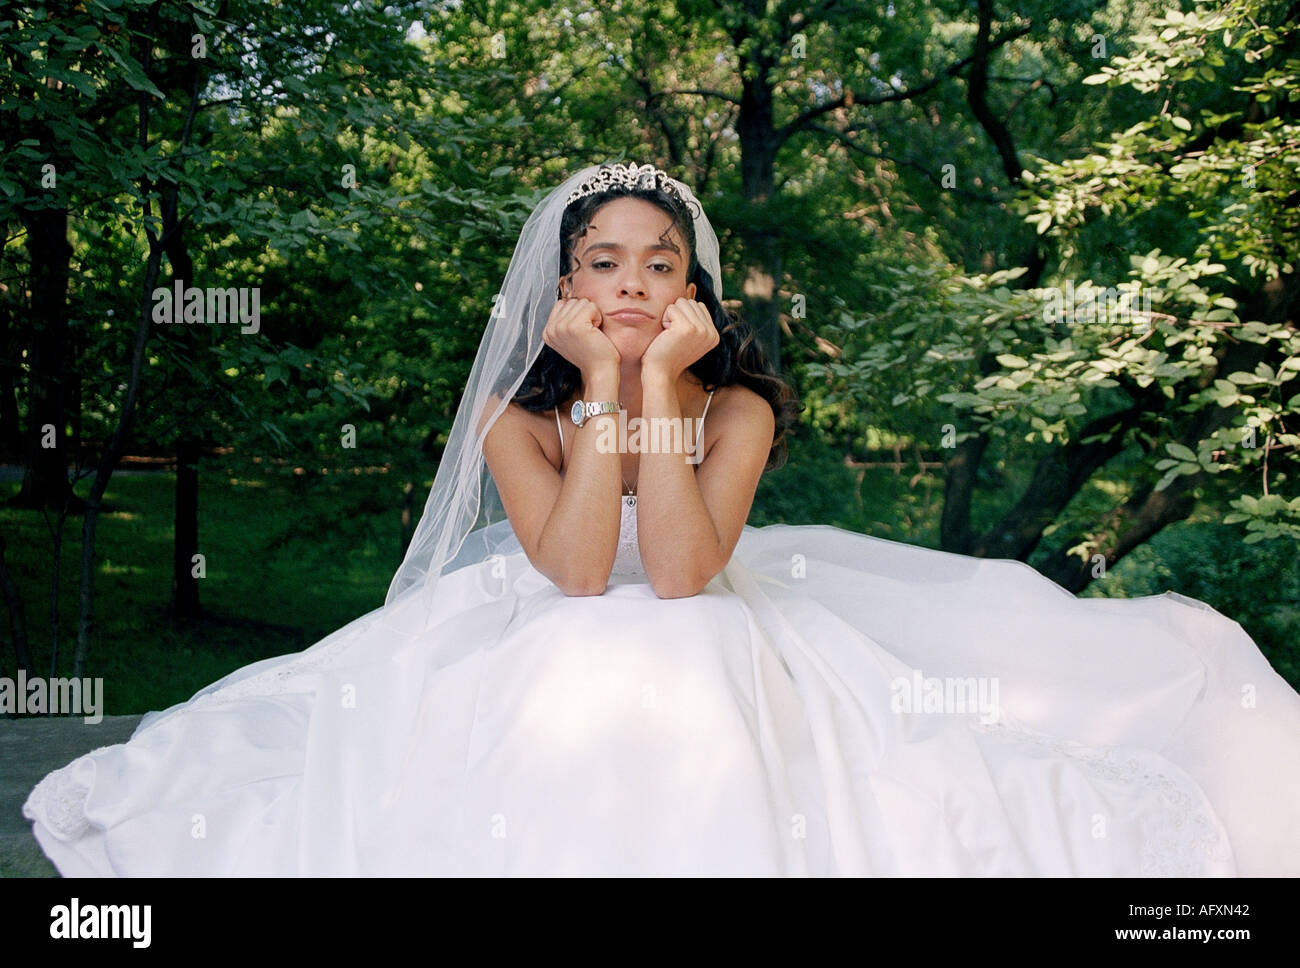 https://c8.alamy.com/comp/AFXN42/a-young-bride-in-a-lovely-wedding-dress-sitting-down-and-looking-sad-AFXN42.jpg